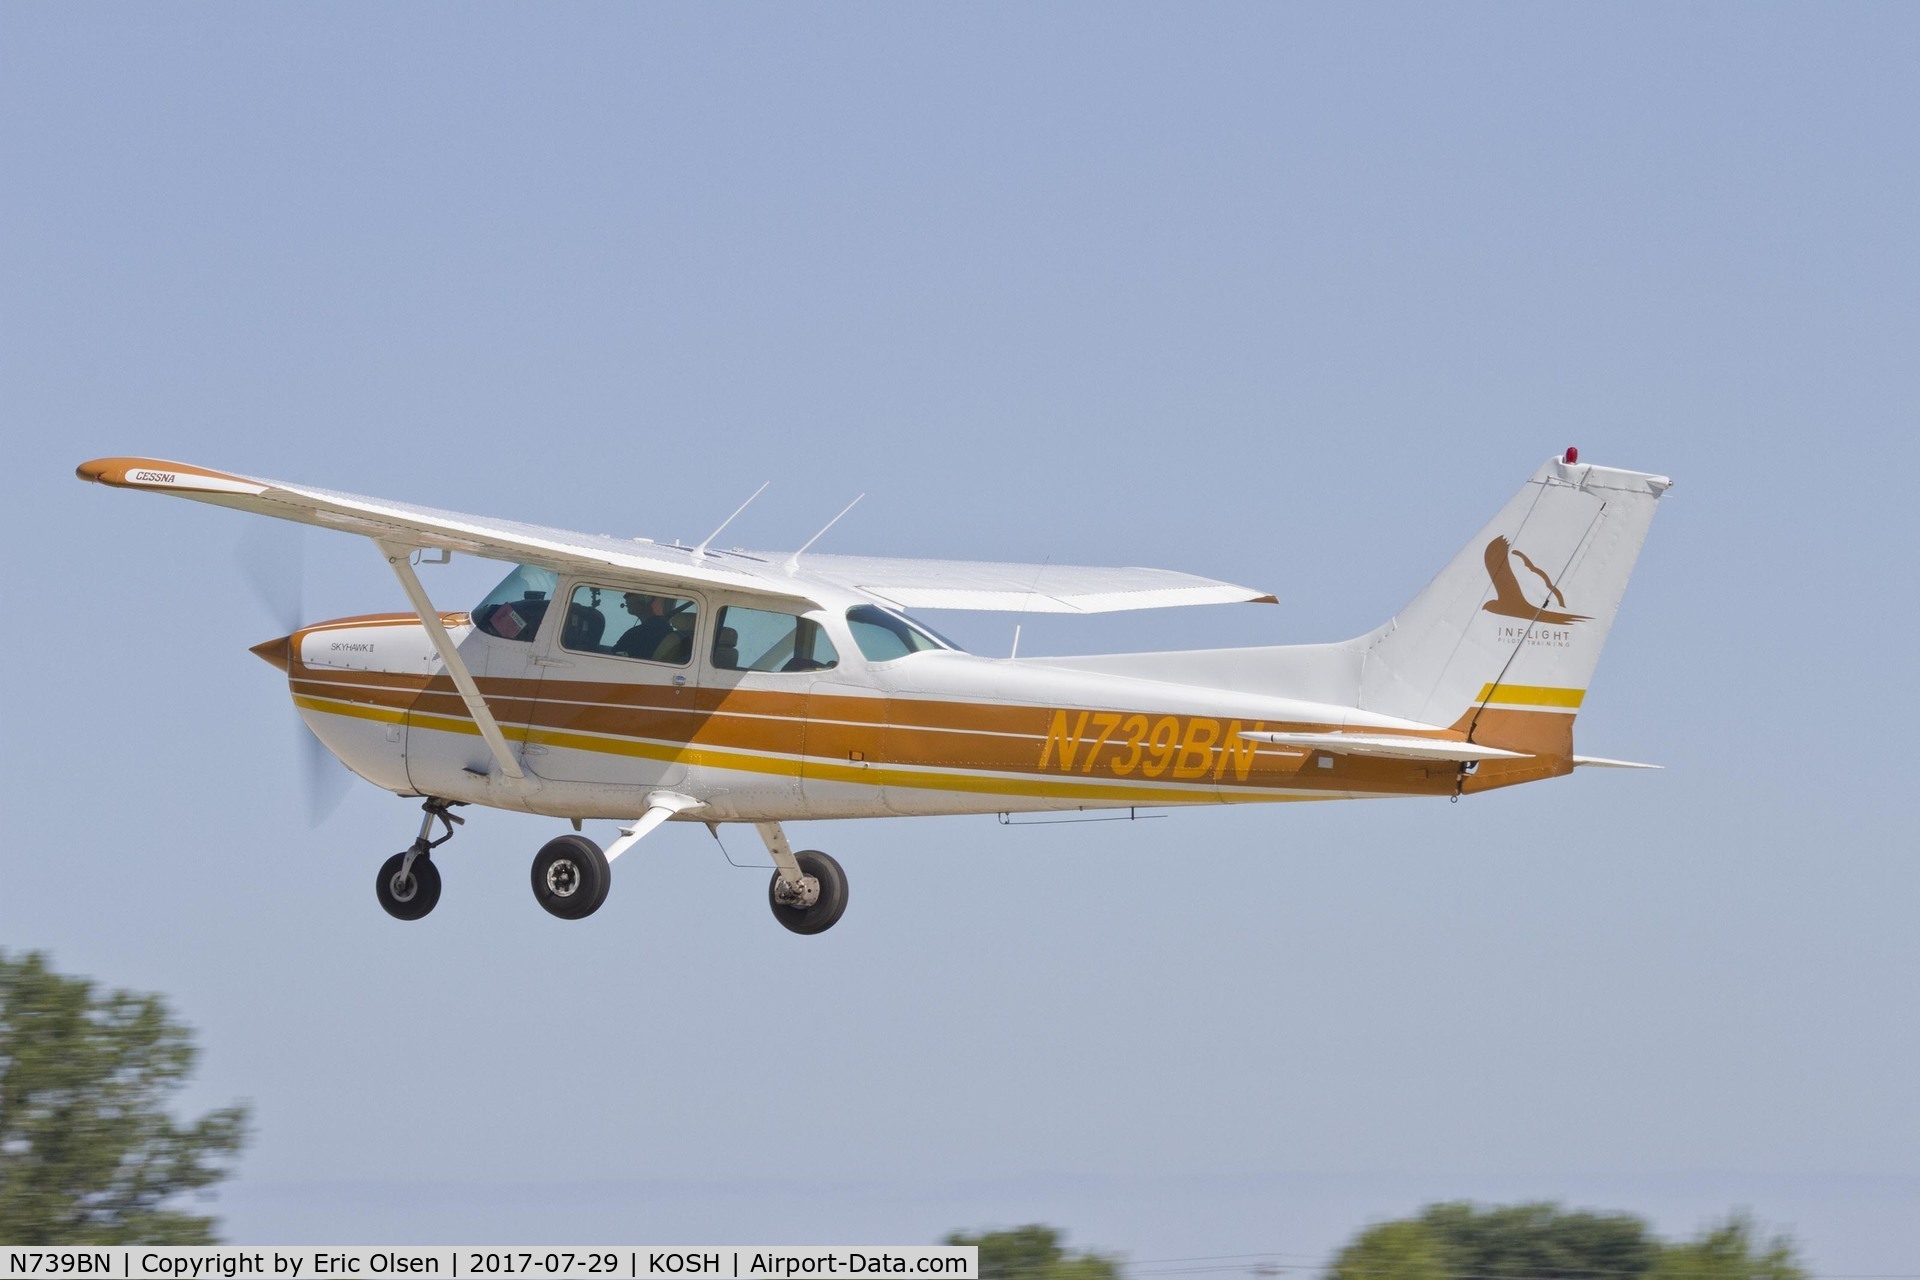 N739BN, 1978 Cessna 172N C/N 17270414, Cessna 172 taking off from KOSH during the 2017 EAA Oshkosh Airventure